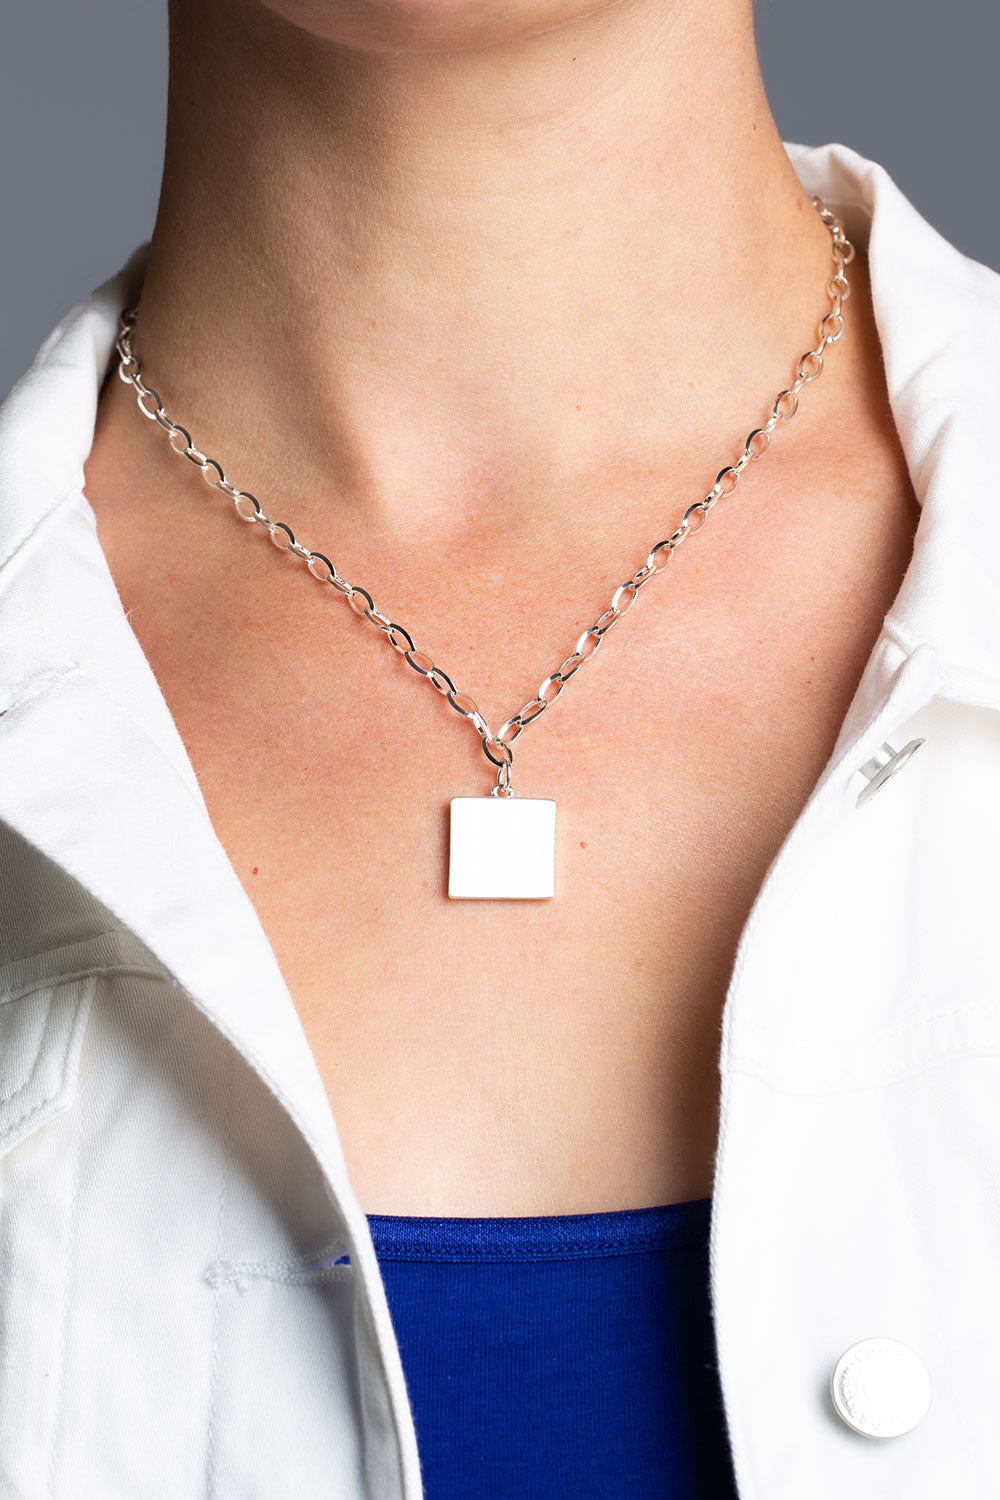 Type 4 Silver Square Necklace